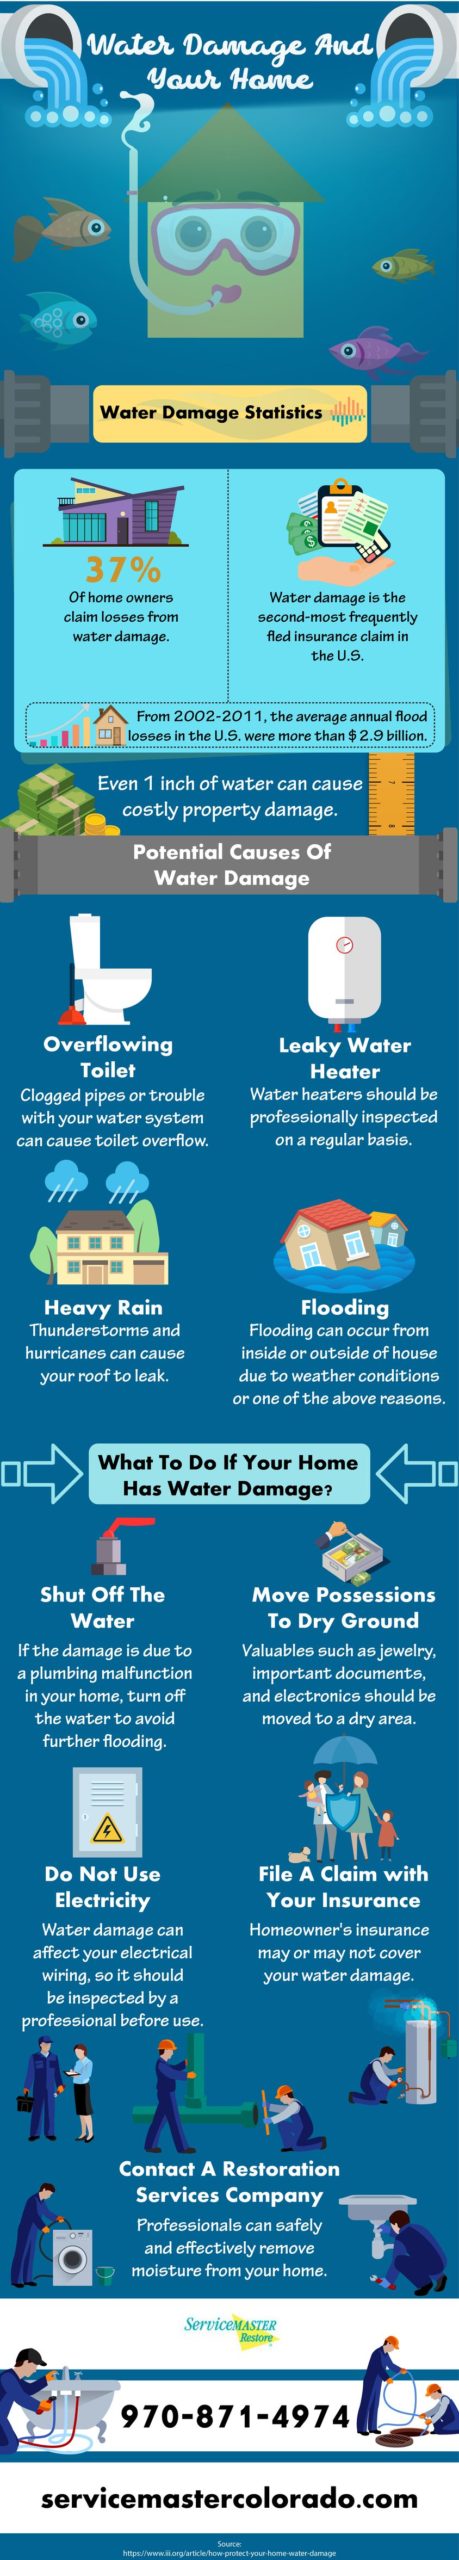 Water Damage And Your Home: Water Damage Statistics